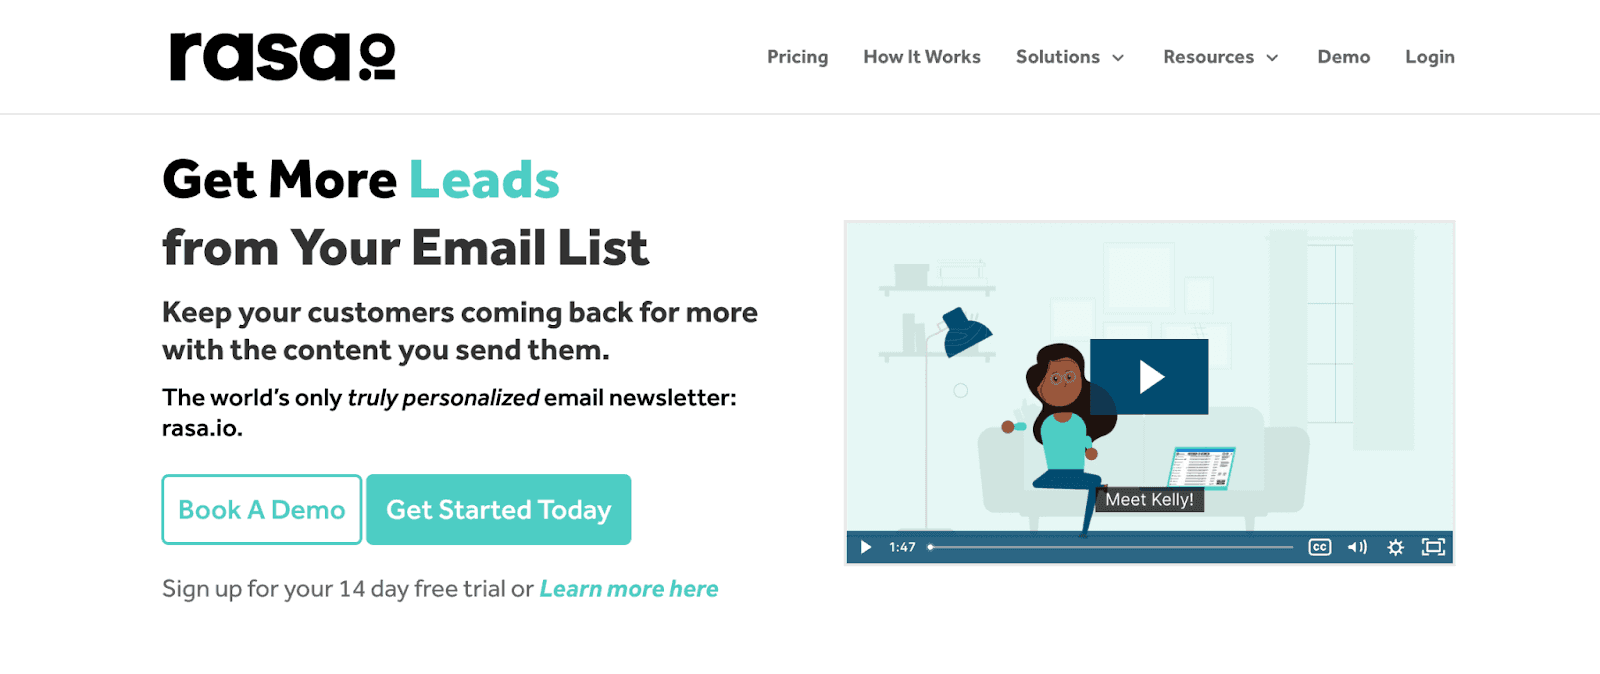 rasa.io webpage =- Get more leads from your email list